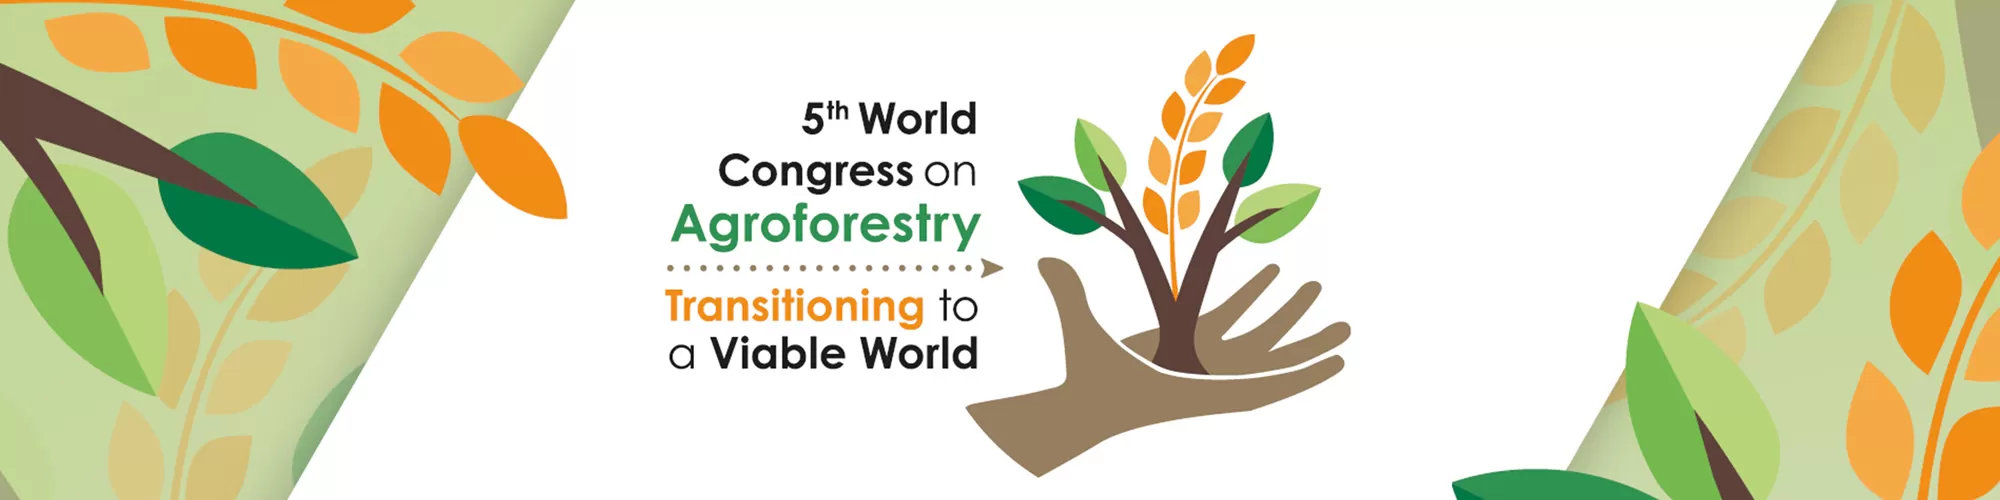 5th World Congress on Agroforestry - Transitioning to a Viable World